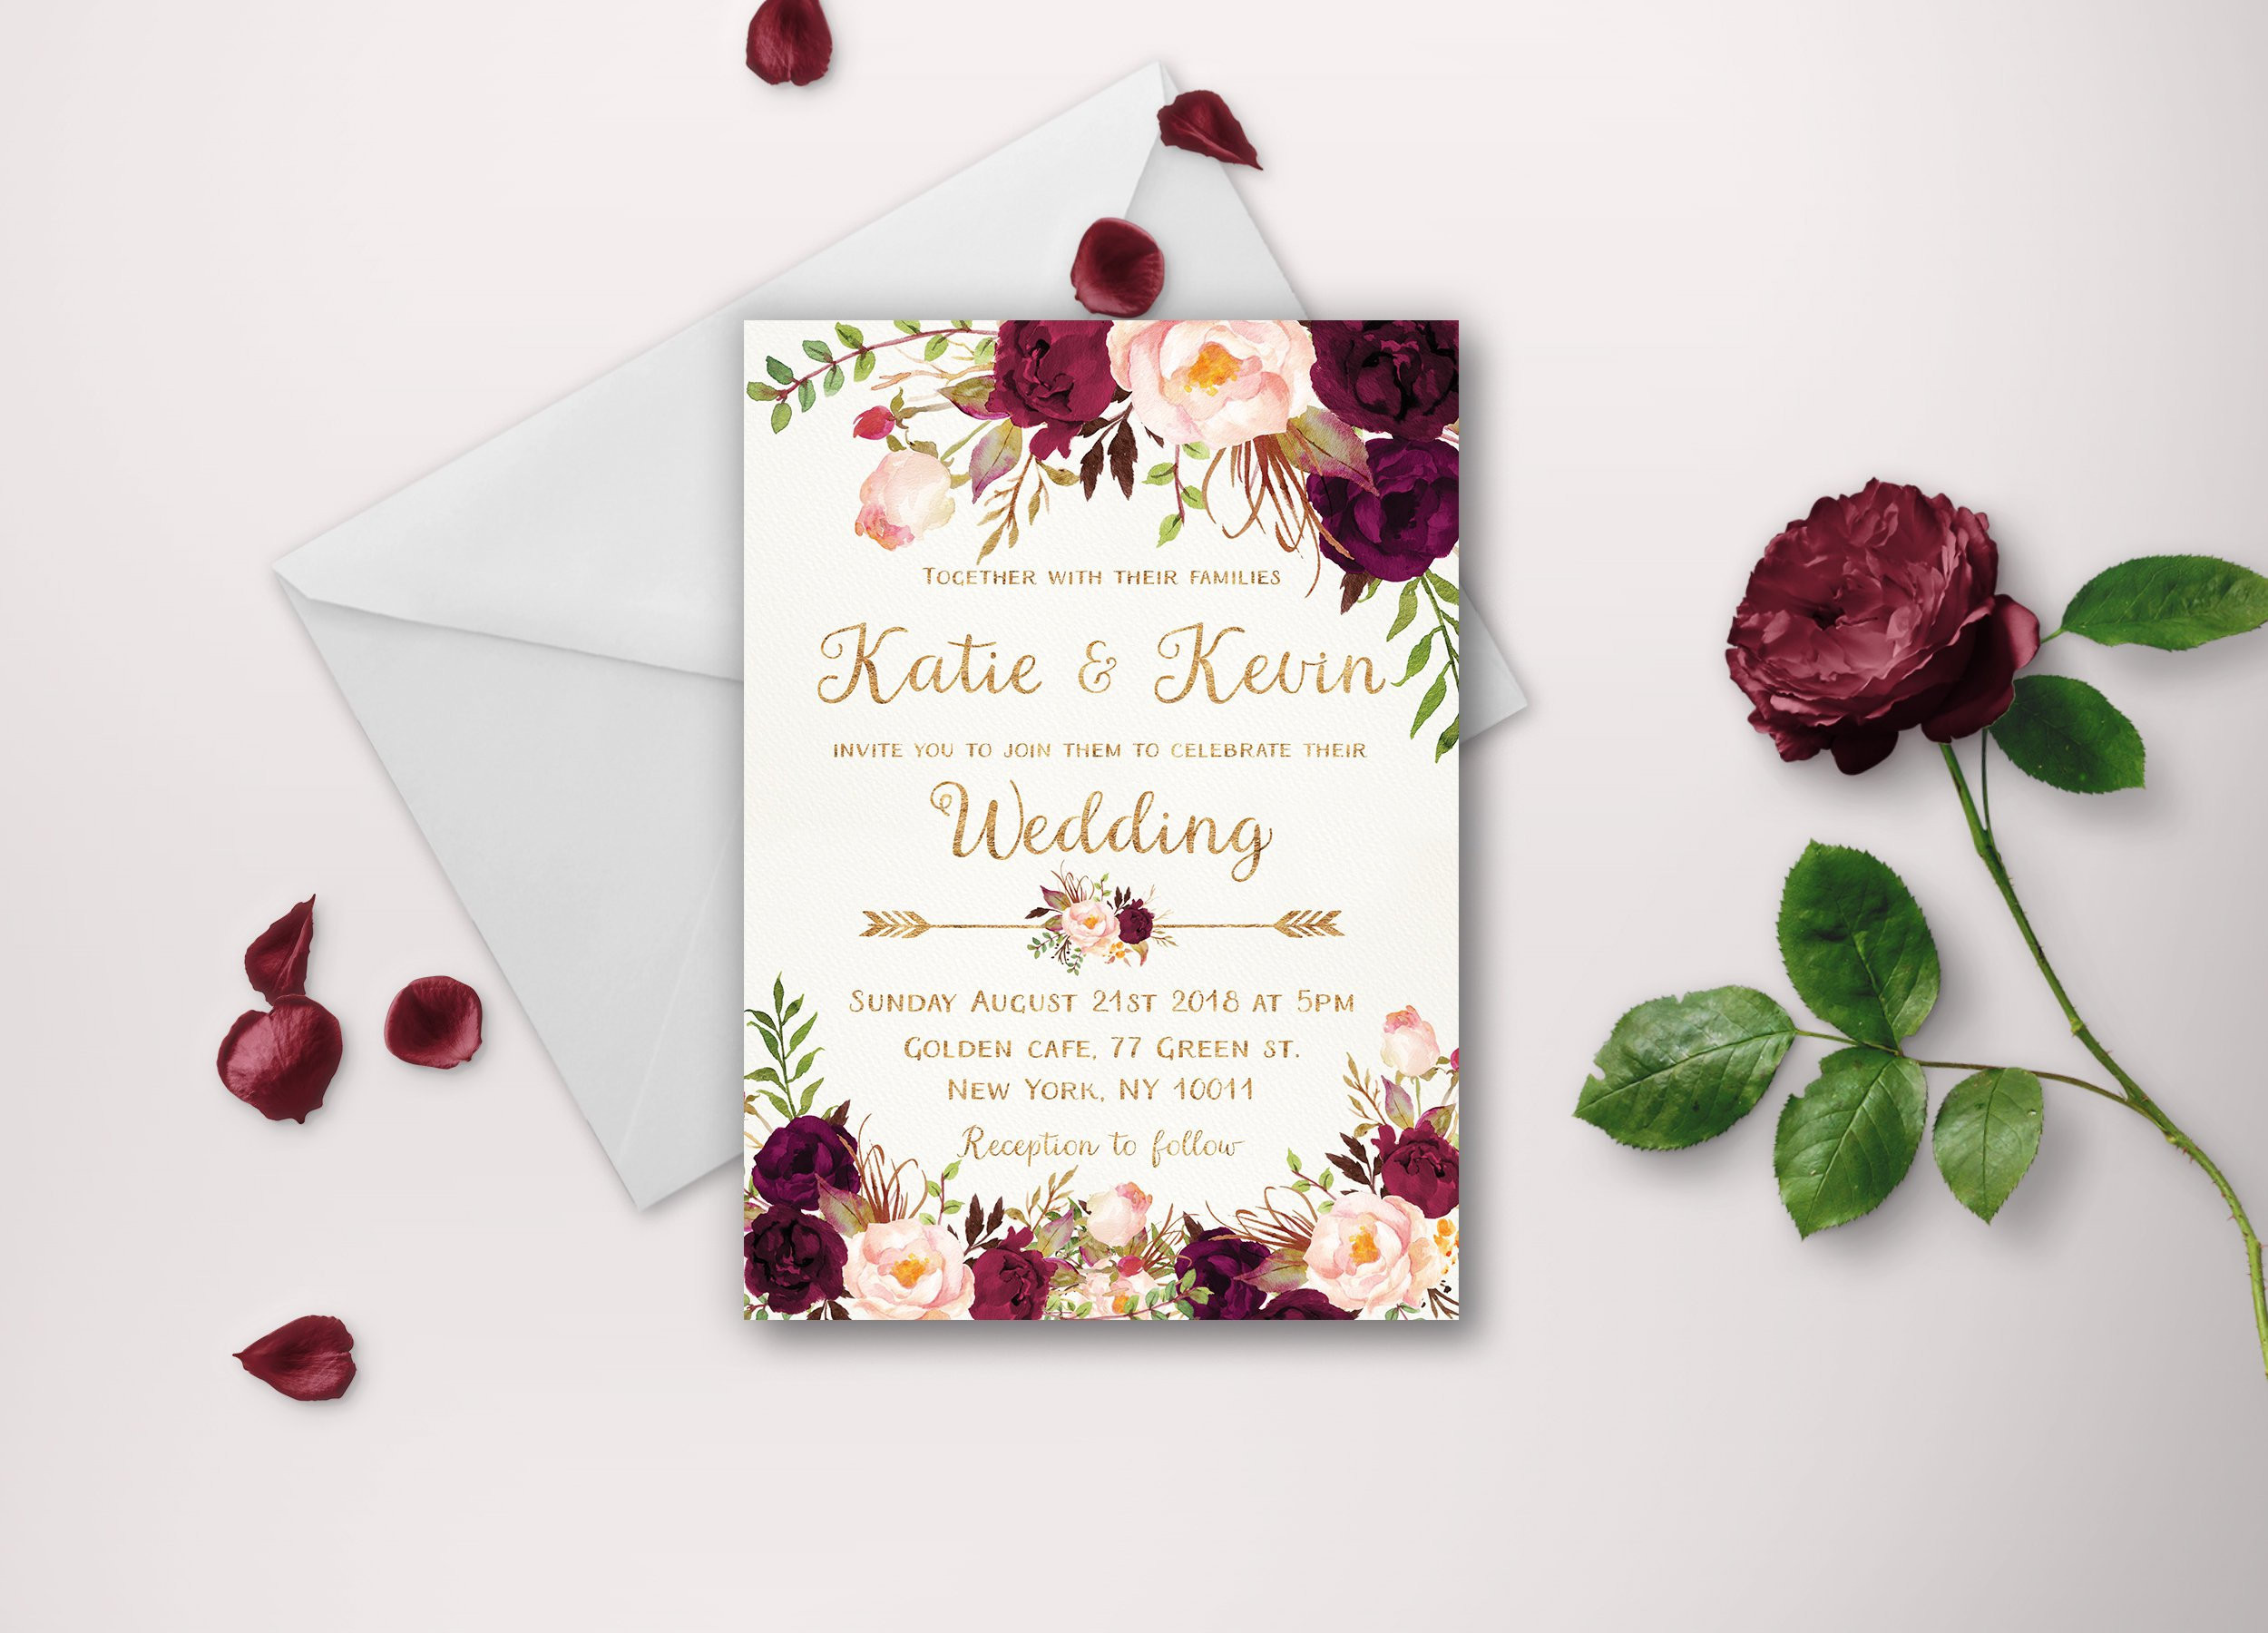 Template For Wedding Invitations
 Floral wedding invitation template Wedding invitation